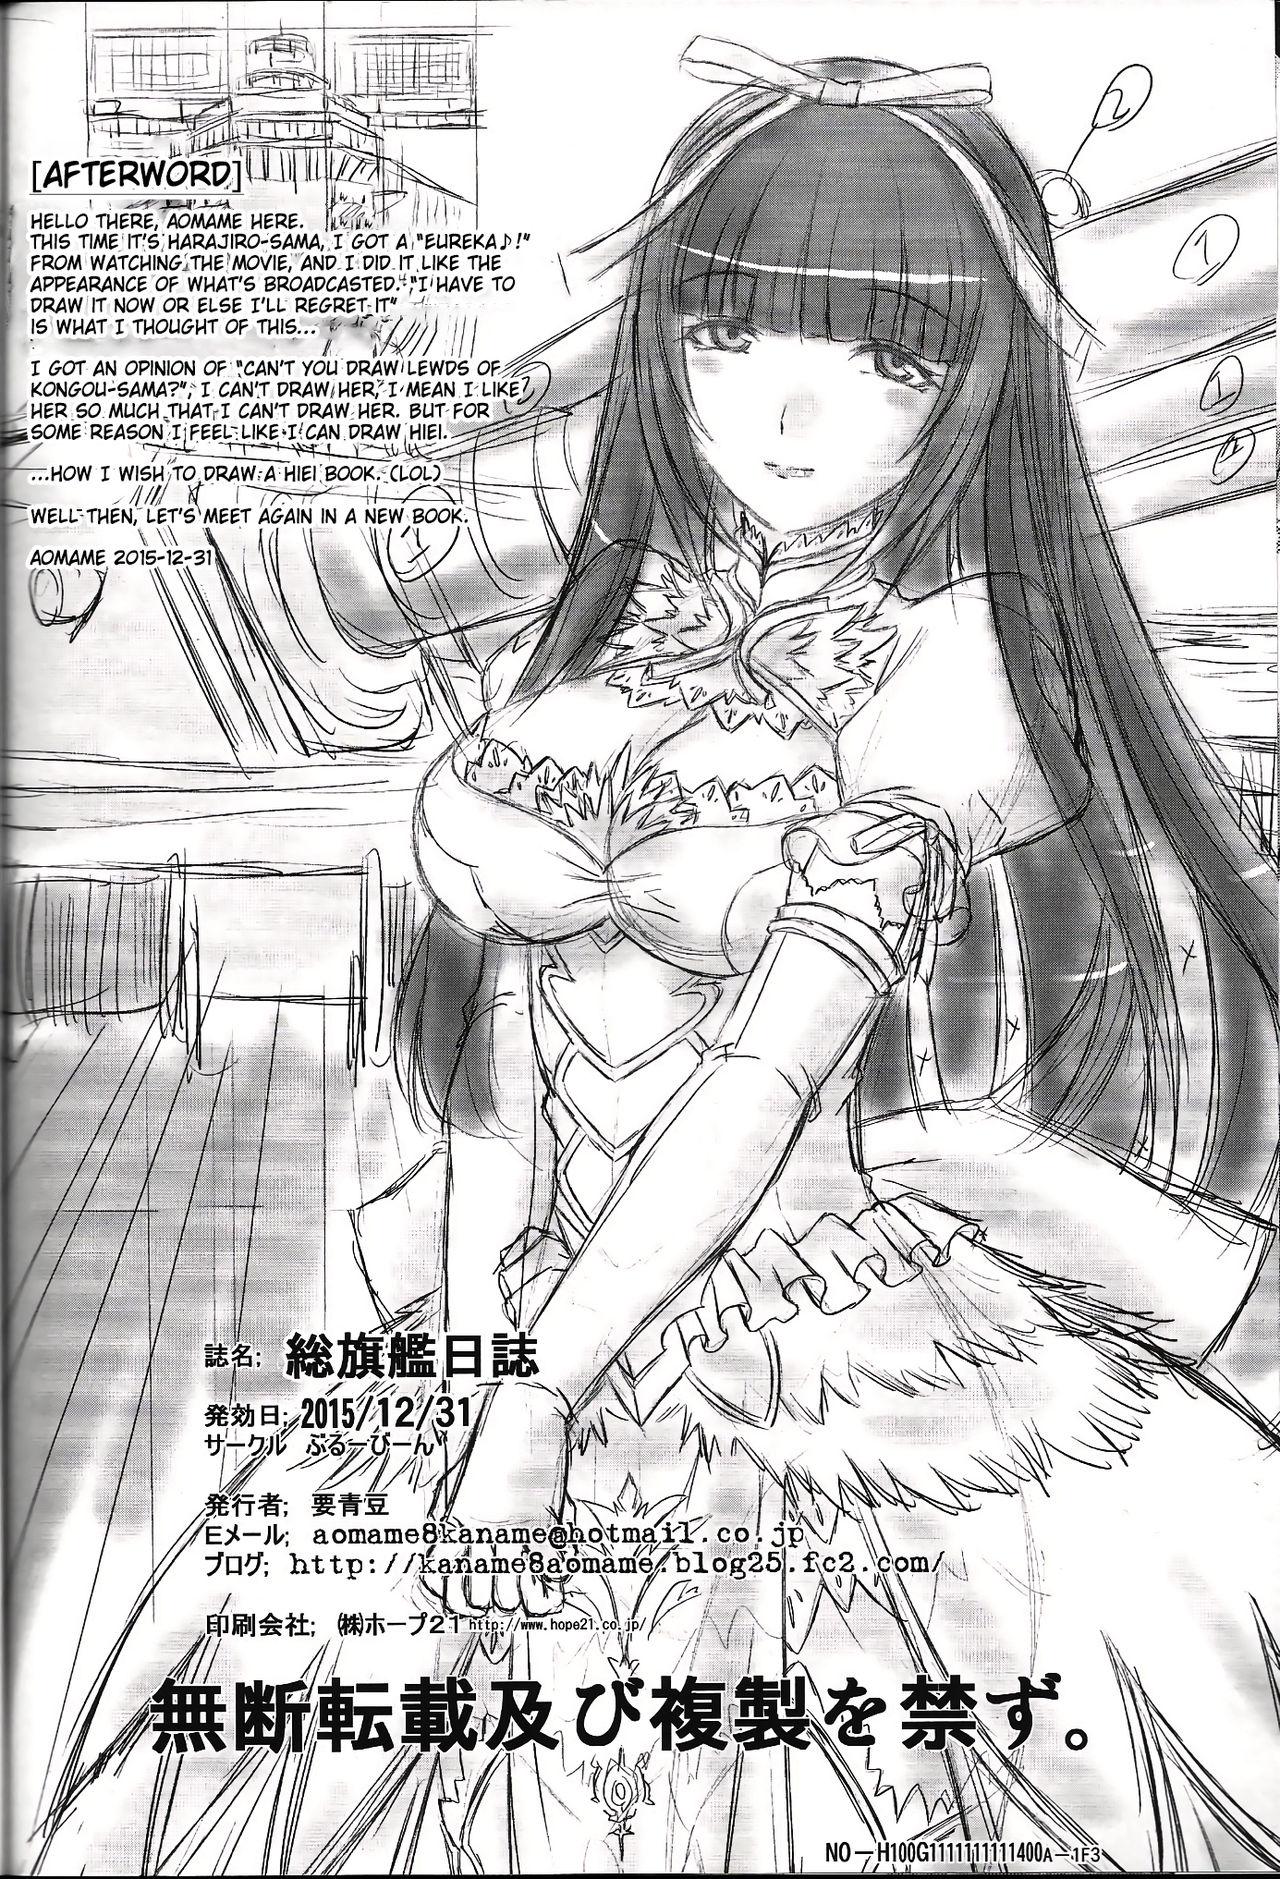 Whipping Sou Kikan Tsushin | Transmission from the Supreme Flagship - Arpeggio of blue steel Tattooed - Page 21